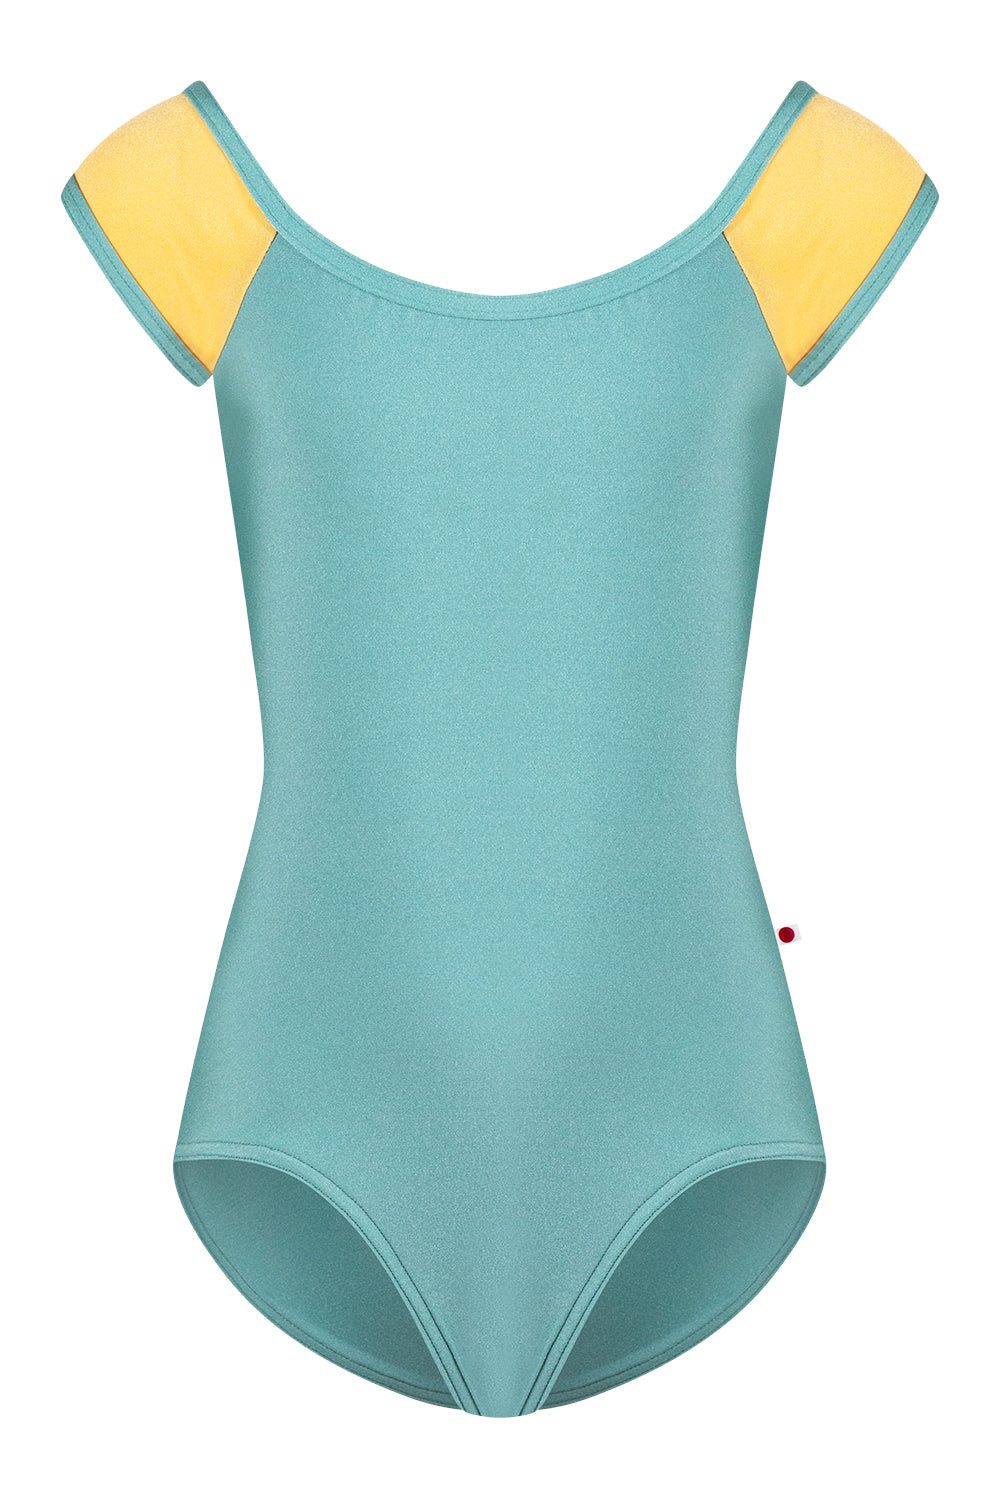 Kids Wendy leotard in N-Cactus body color with N-Daffodil top color and N-Cactus trim color